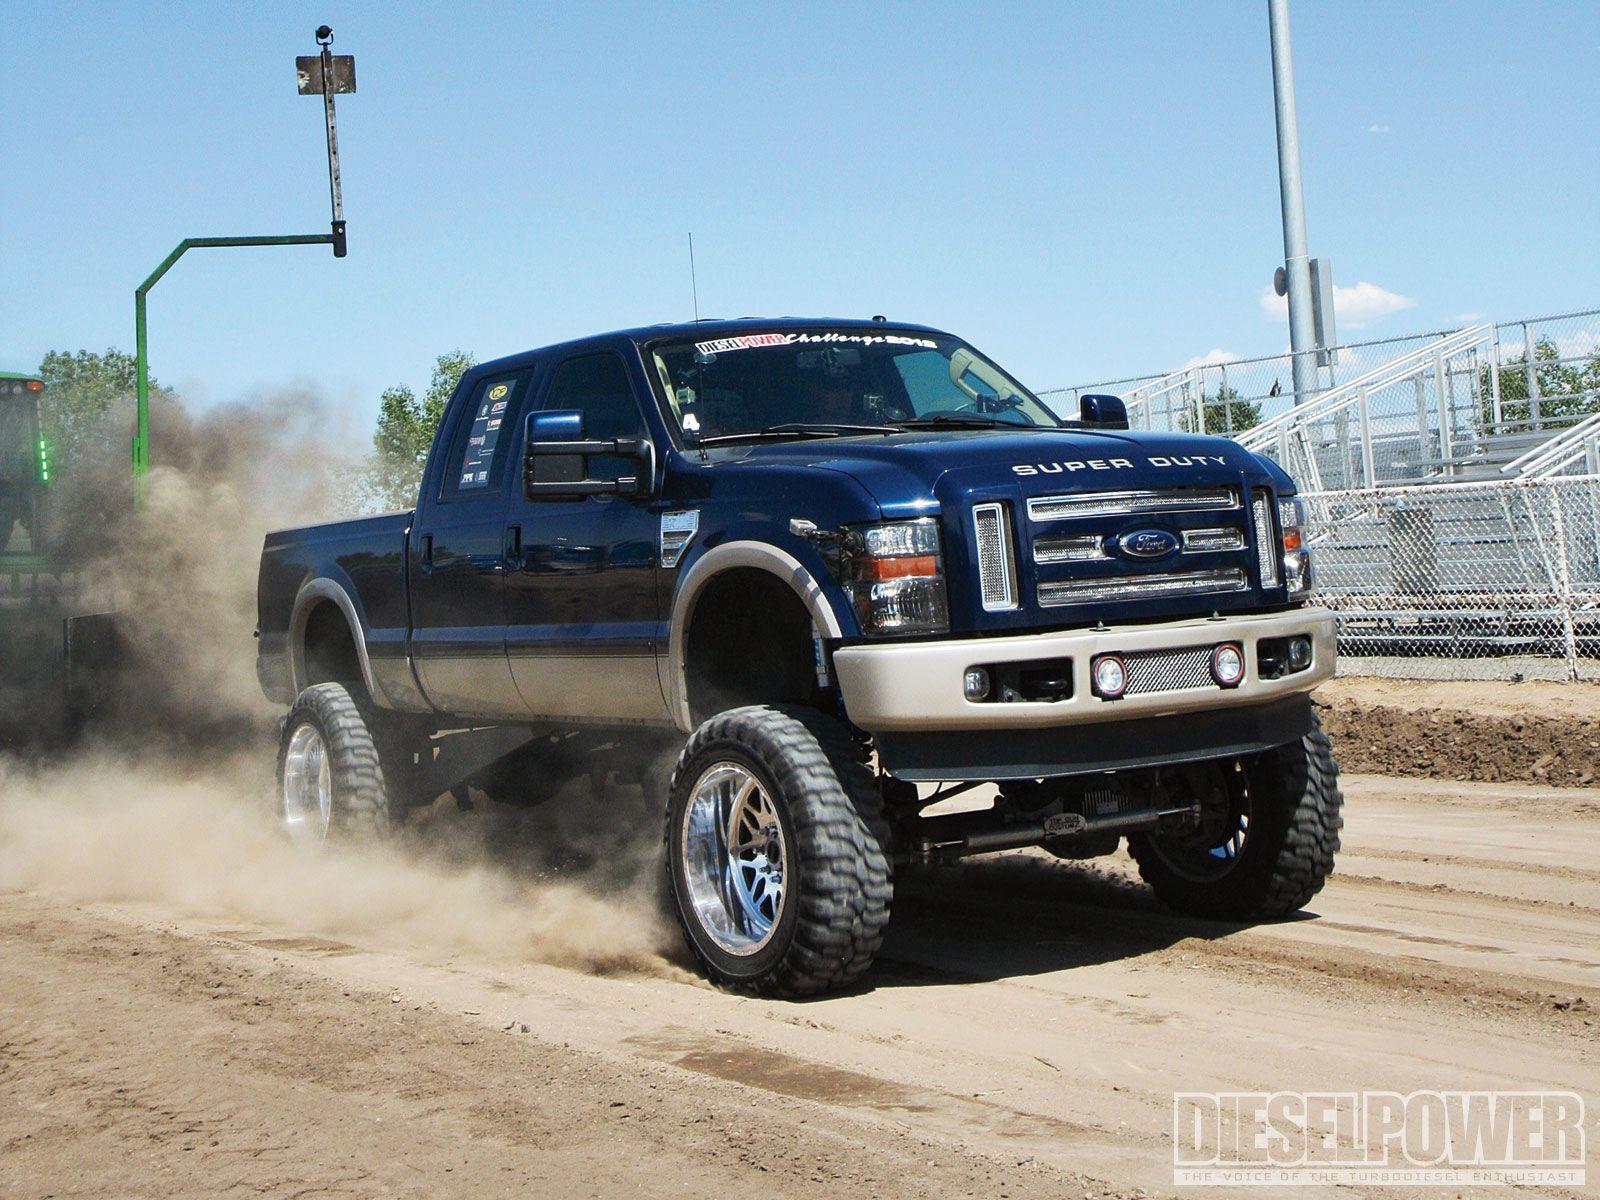 Ford F250 Wallpapers - Wallpaper Cave